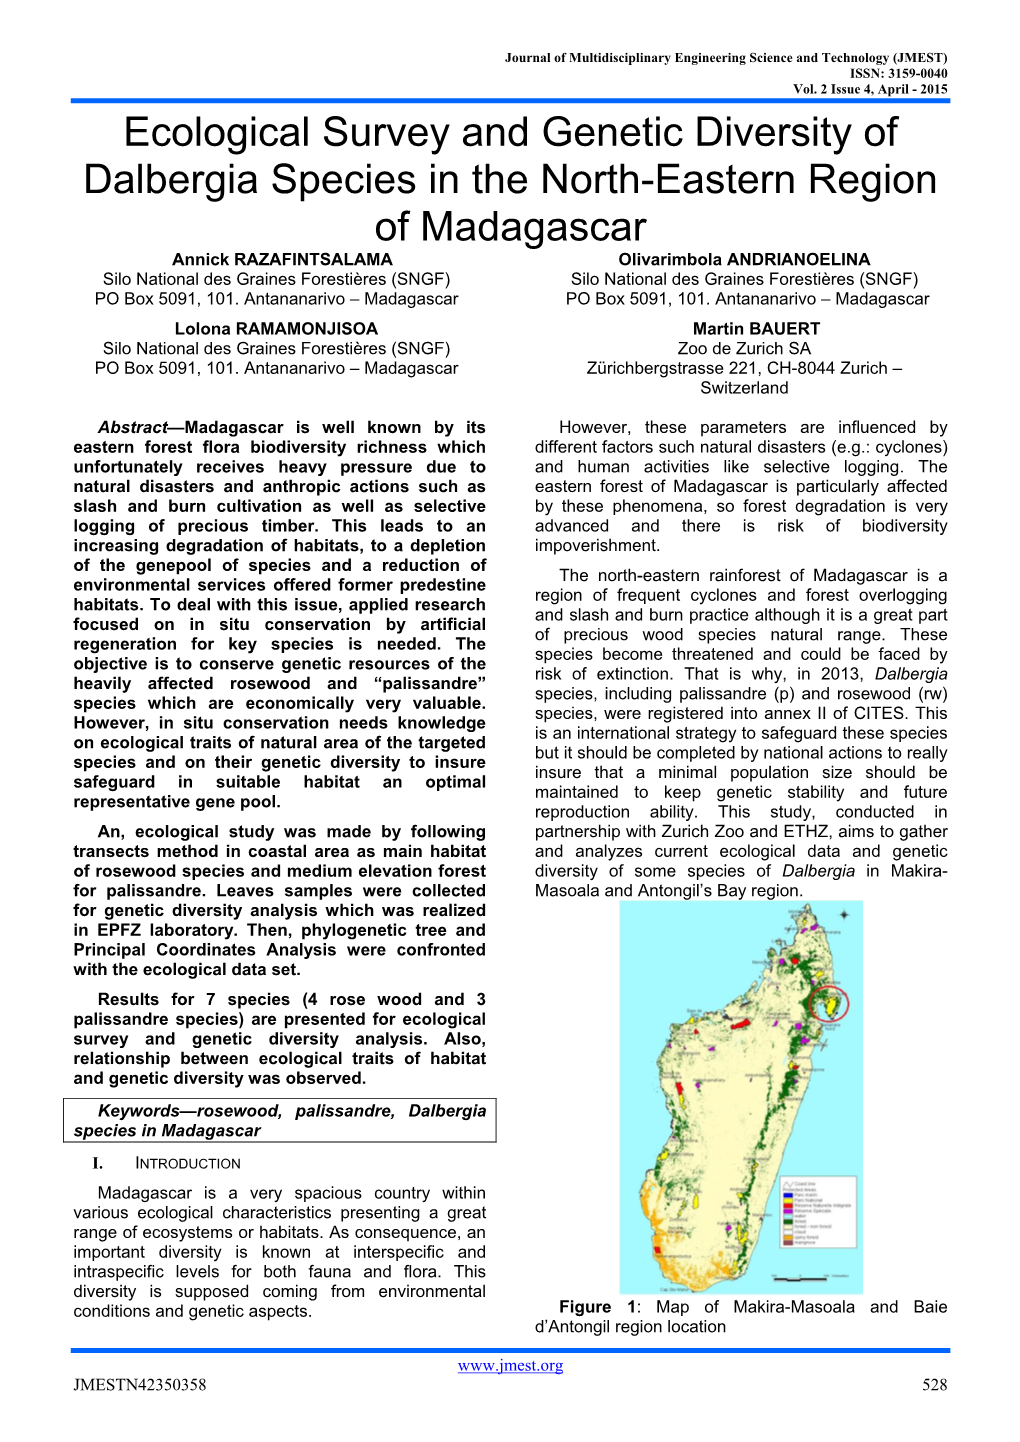 Ecological Survey and Genetic Diversity of Dalbergia Species in the North-Eastern Region